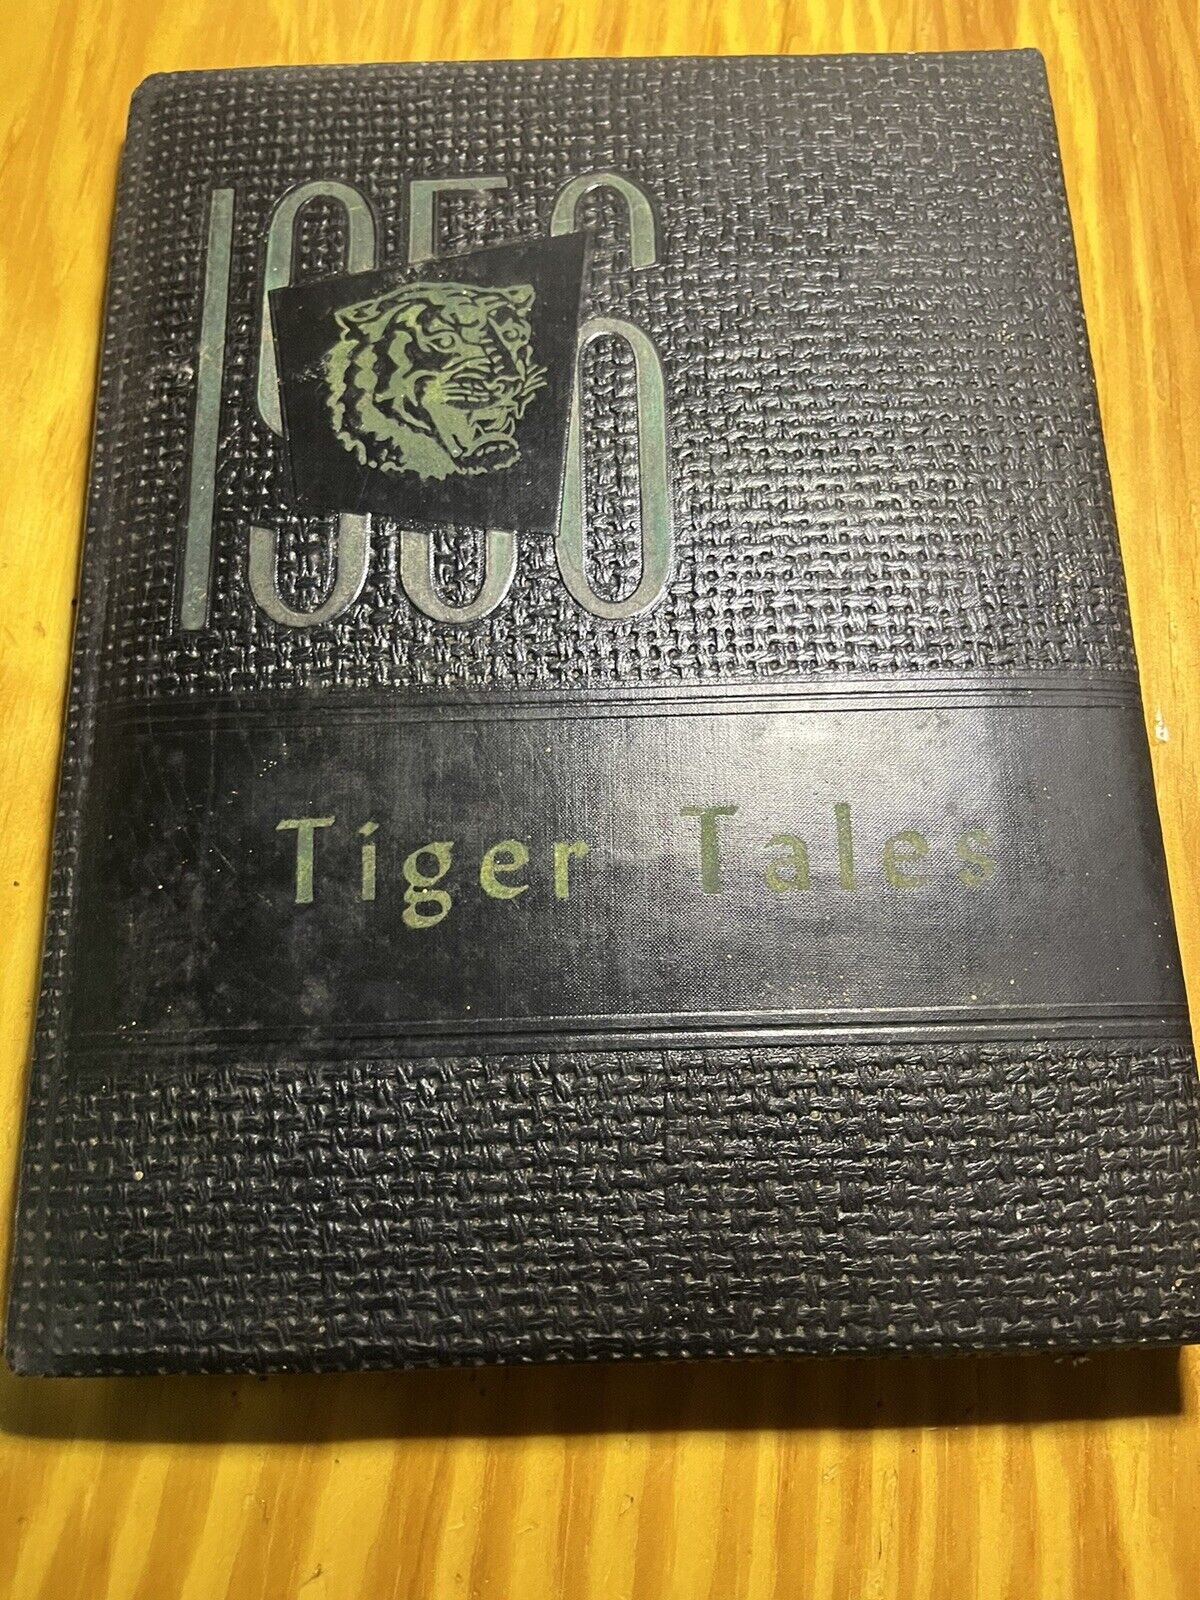 Tiger tales Lancaster High school Yearbook Lancaster Texas 1956